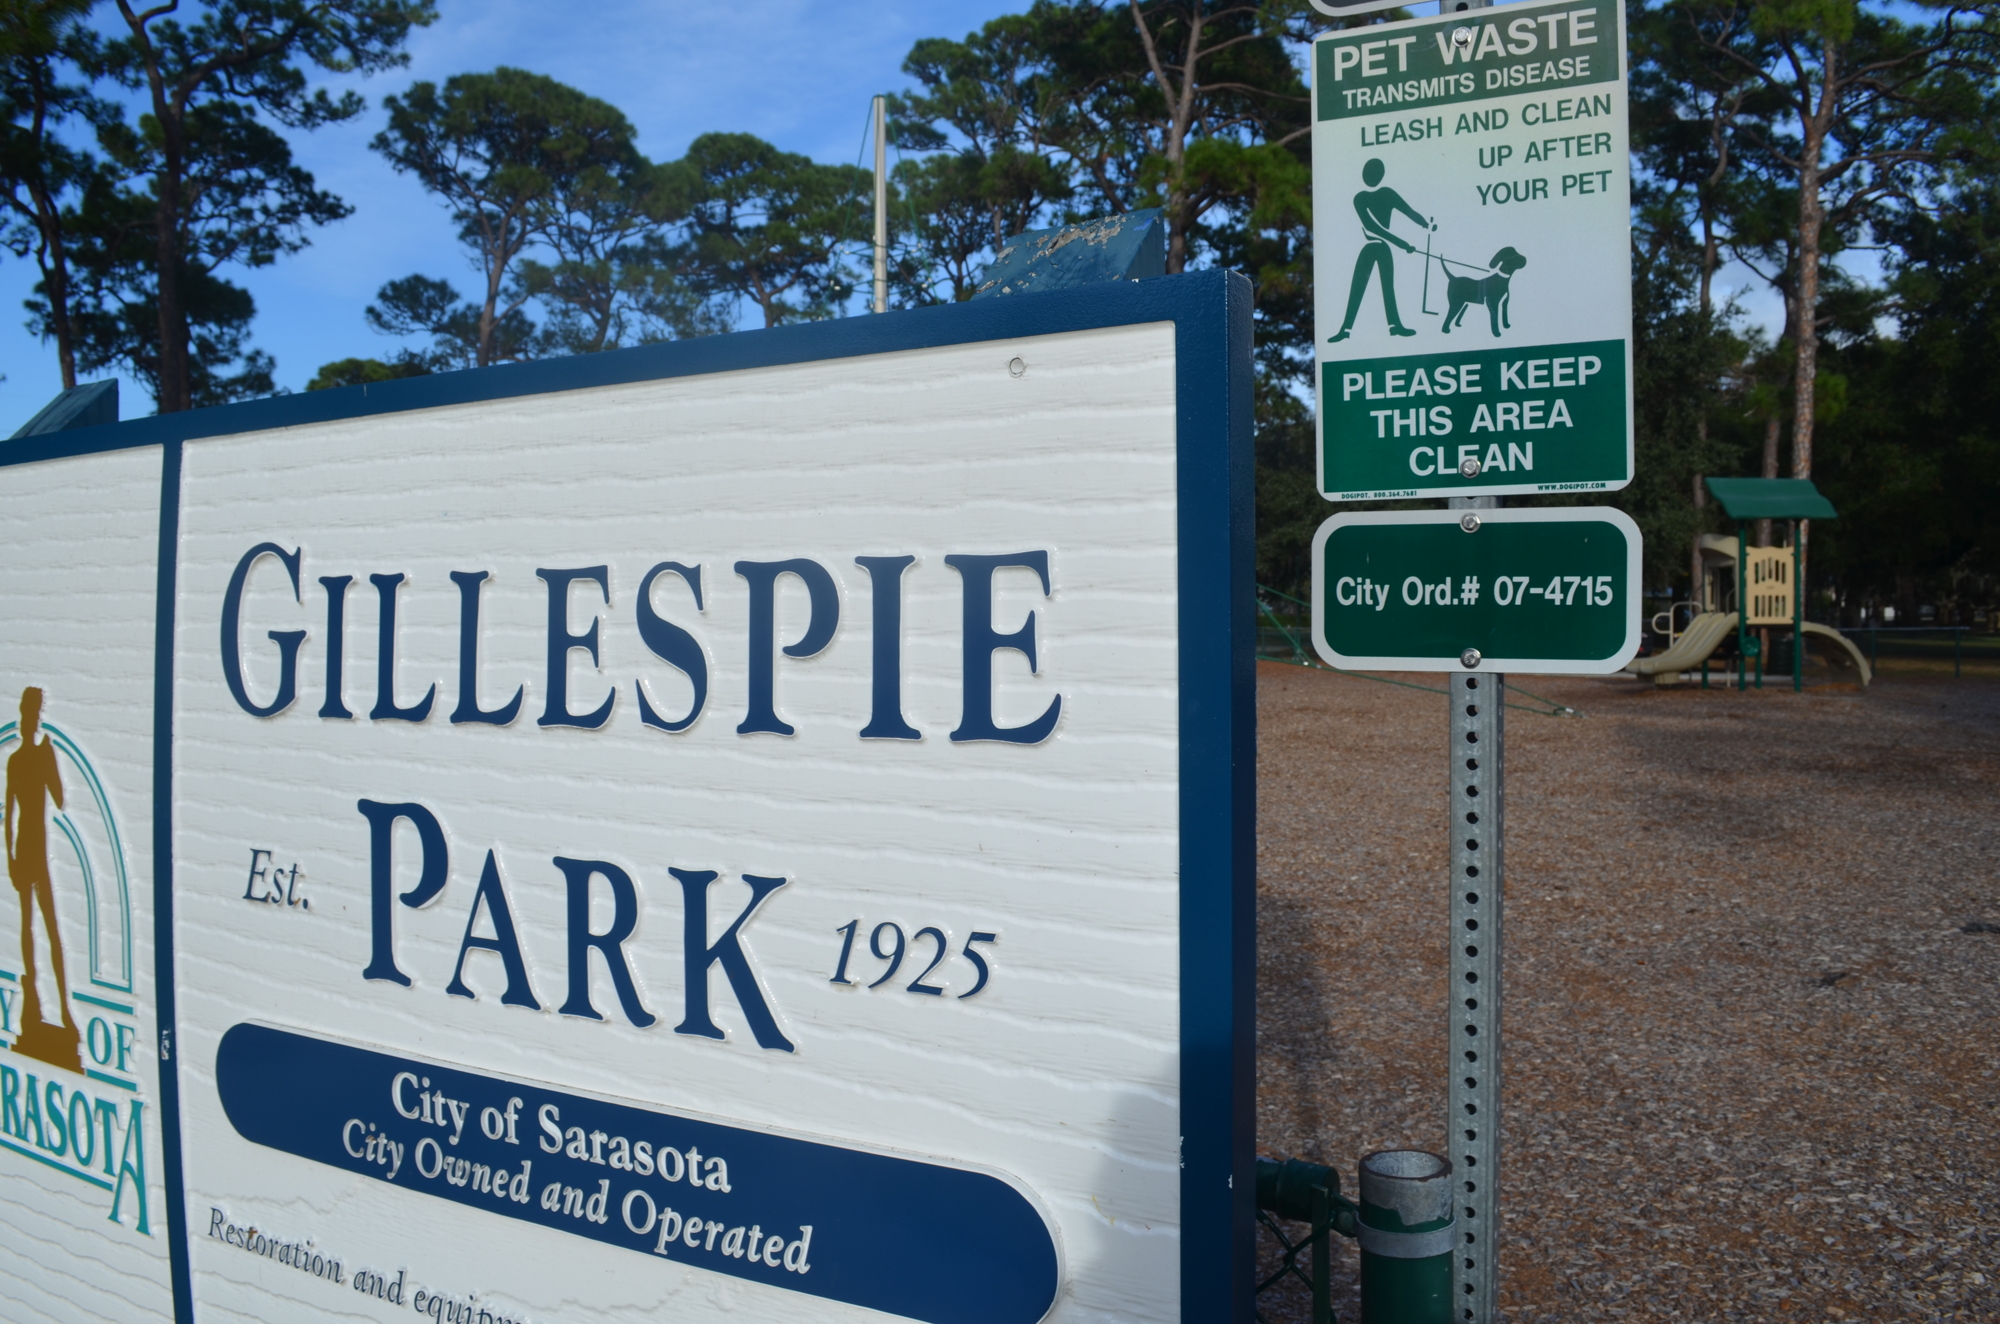 Gillespie Park is one of four city parks where dogs must remain on a leash.